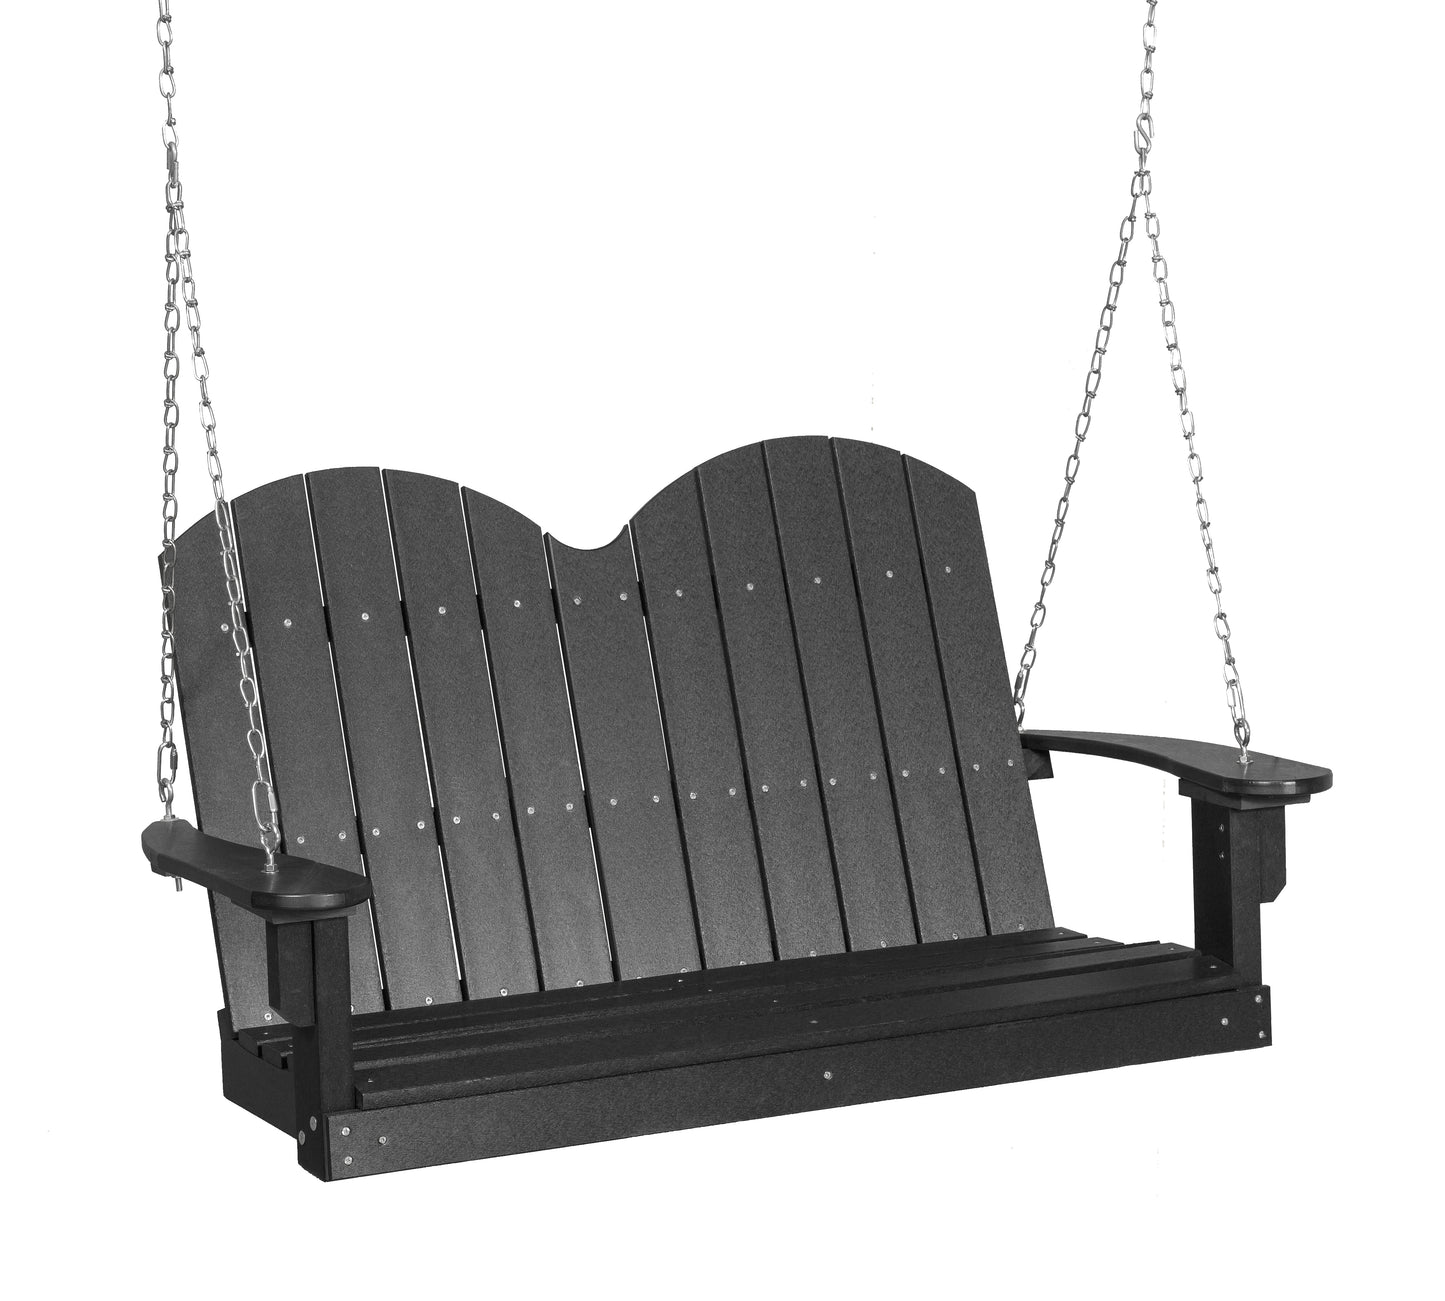 Wildridge Outdoor Recycled Plastic Classic Savannah 4ft Porch Swing - LEAD TIME TO SHIP 6 WEEKS OR LESS